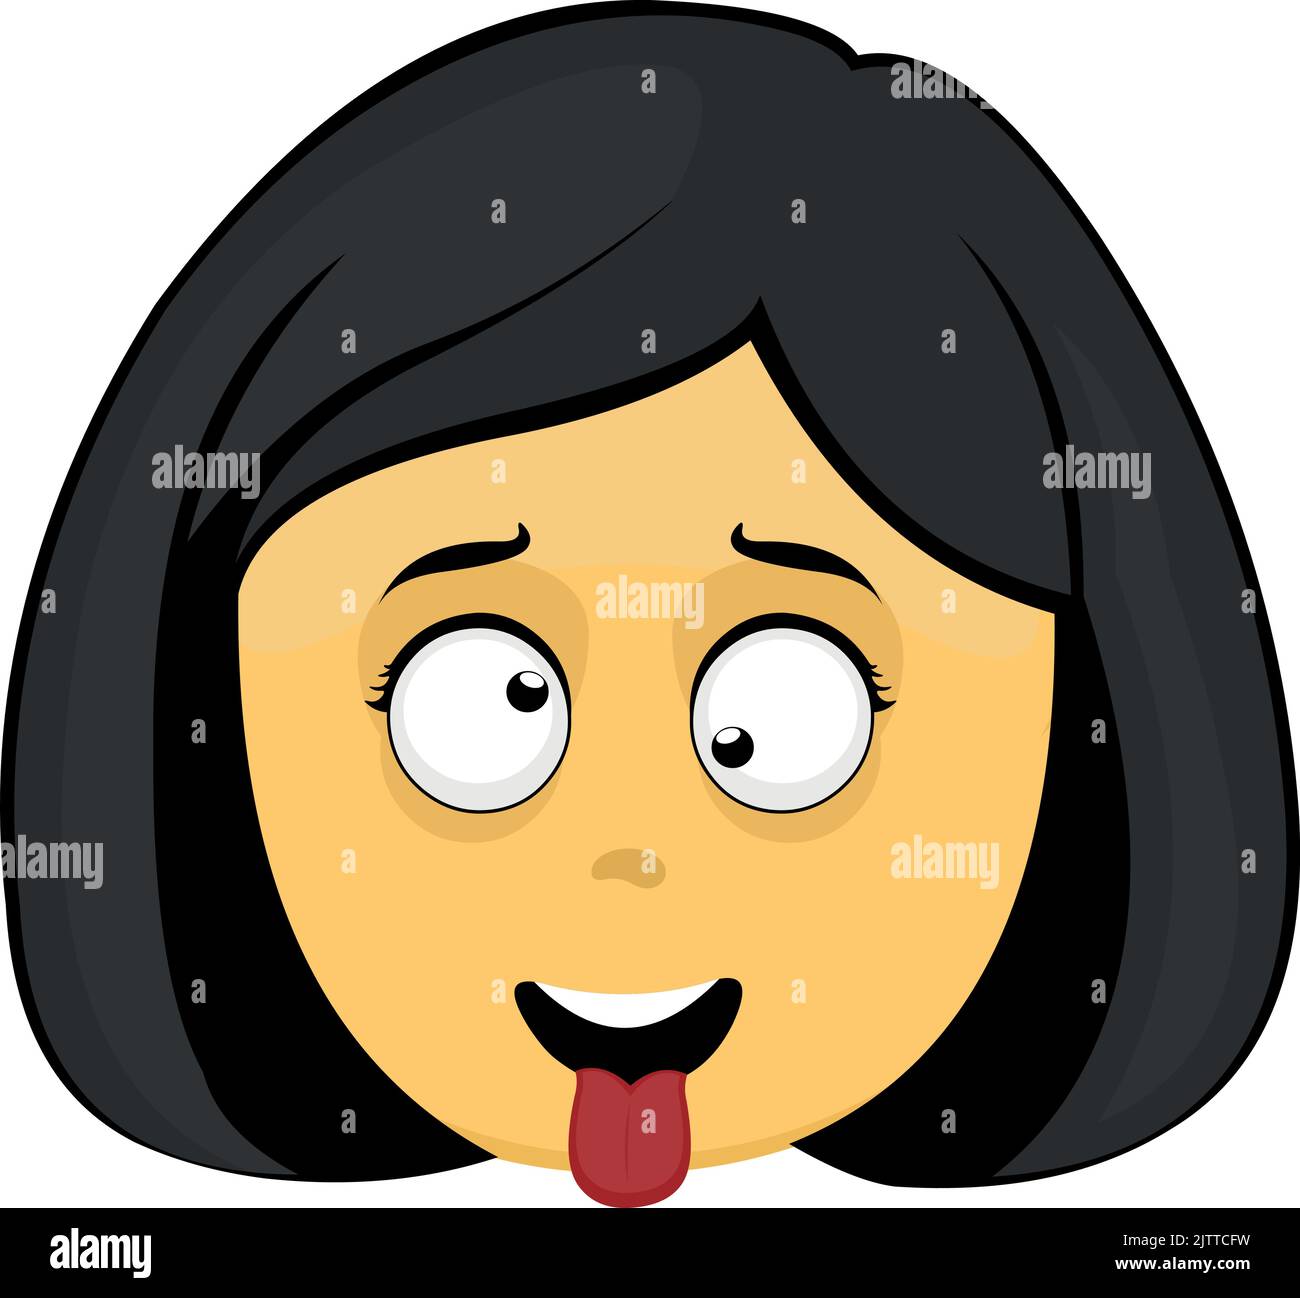 Vector emoticon illustration of a yellow cartoon woman face with a crazy expression Stock Vector